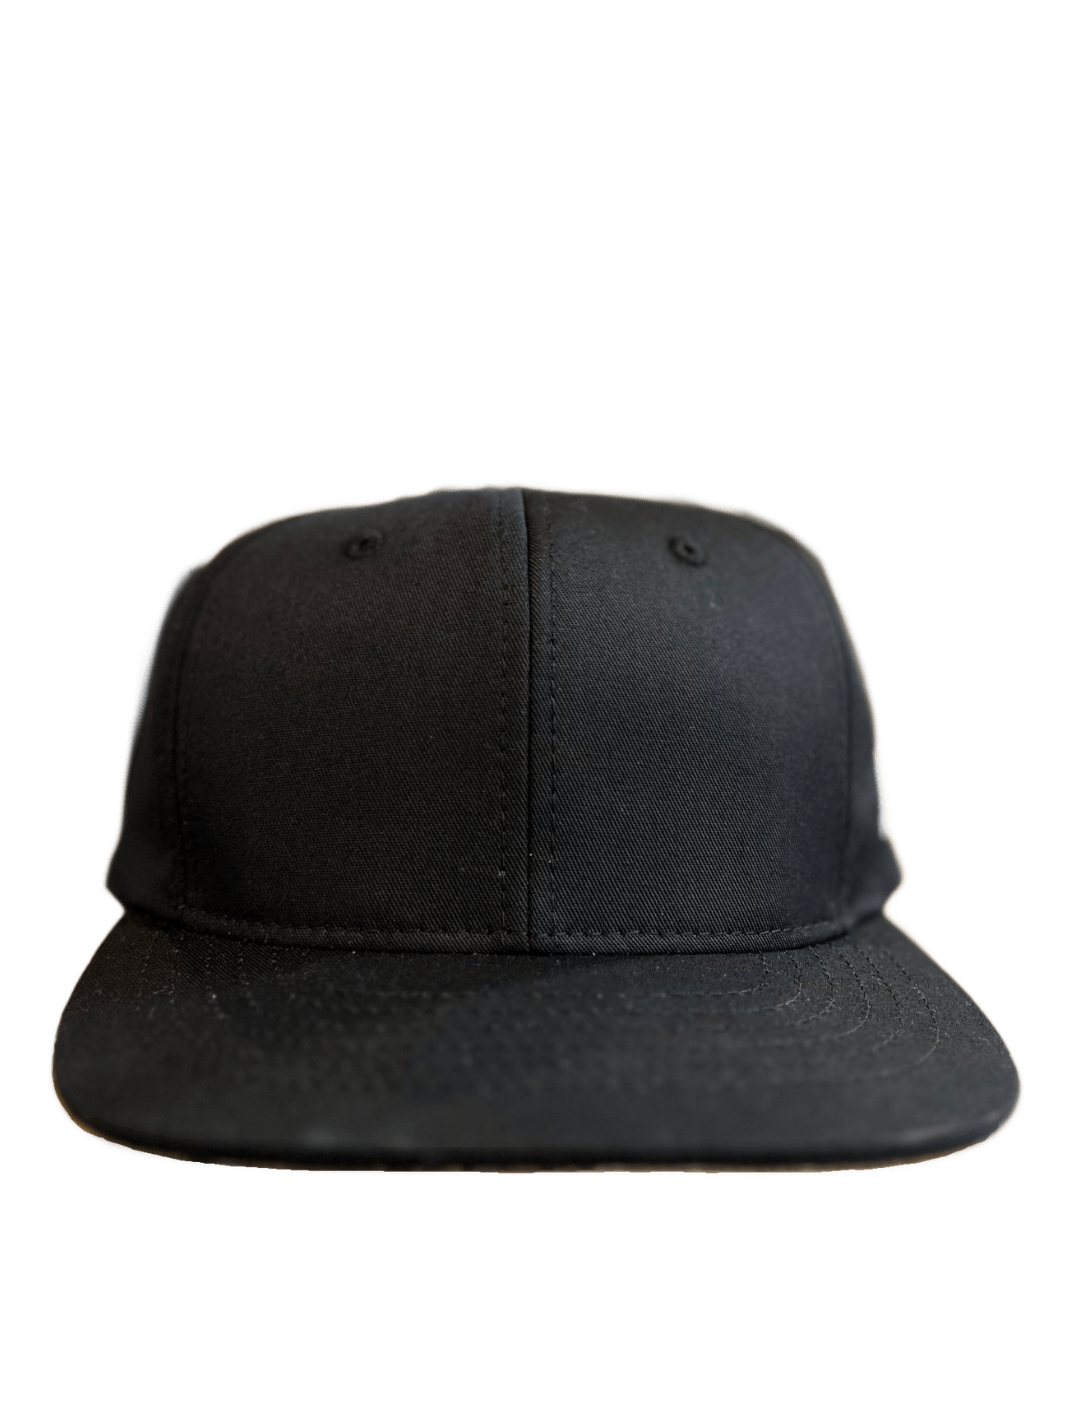 The front profile of the Rundle Snapback hat, highlighting the front portion of the hat and bill, with no graphic or label sewn. 